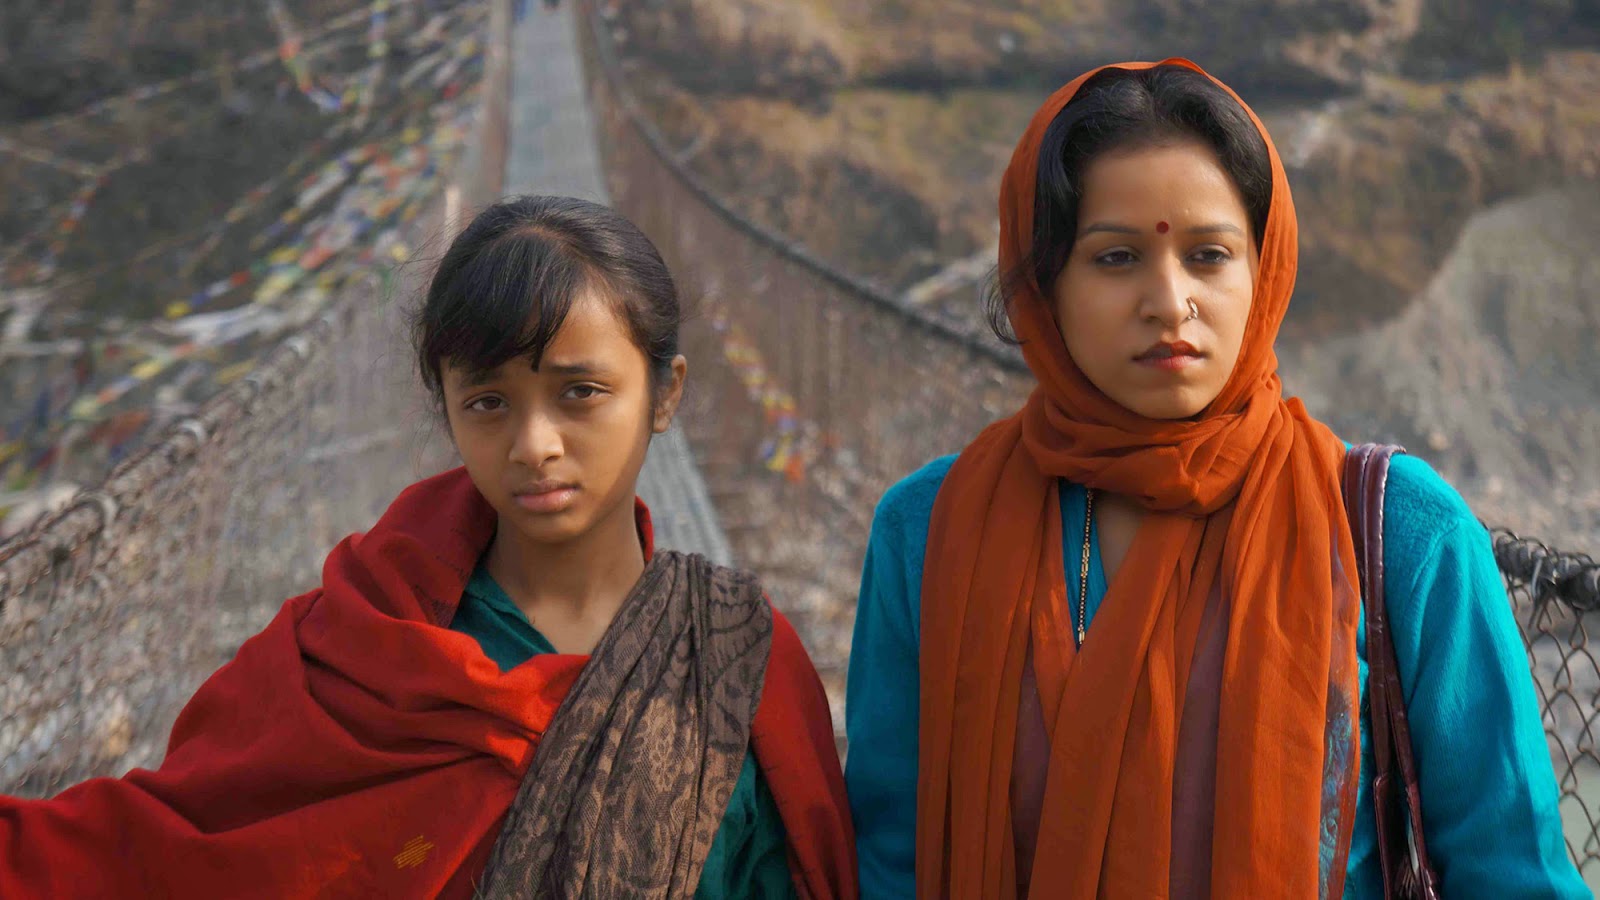 babylondonorbital London INDIAN Film Festival opens its festival with